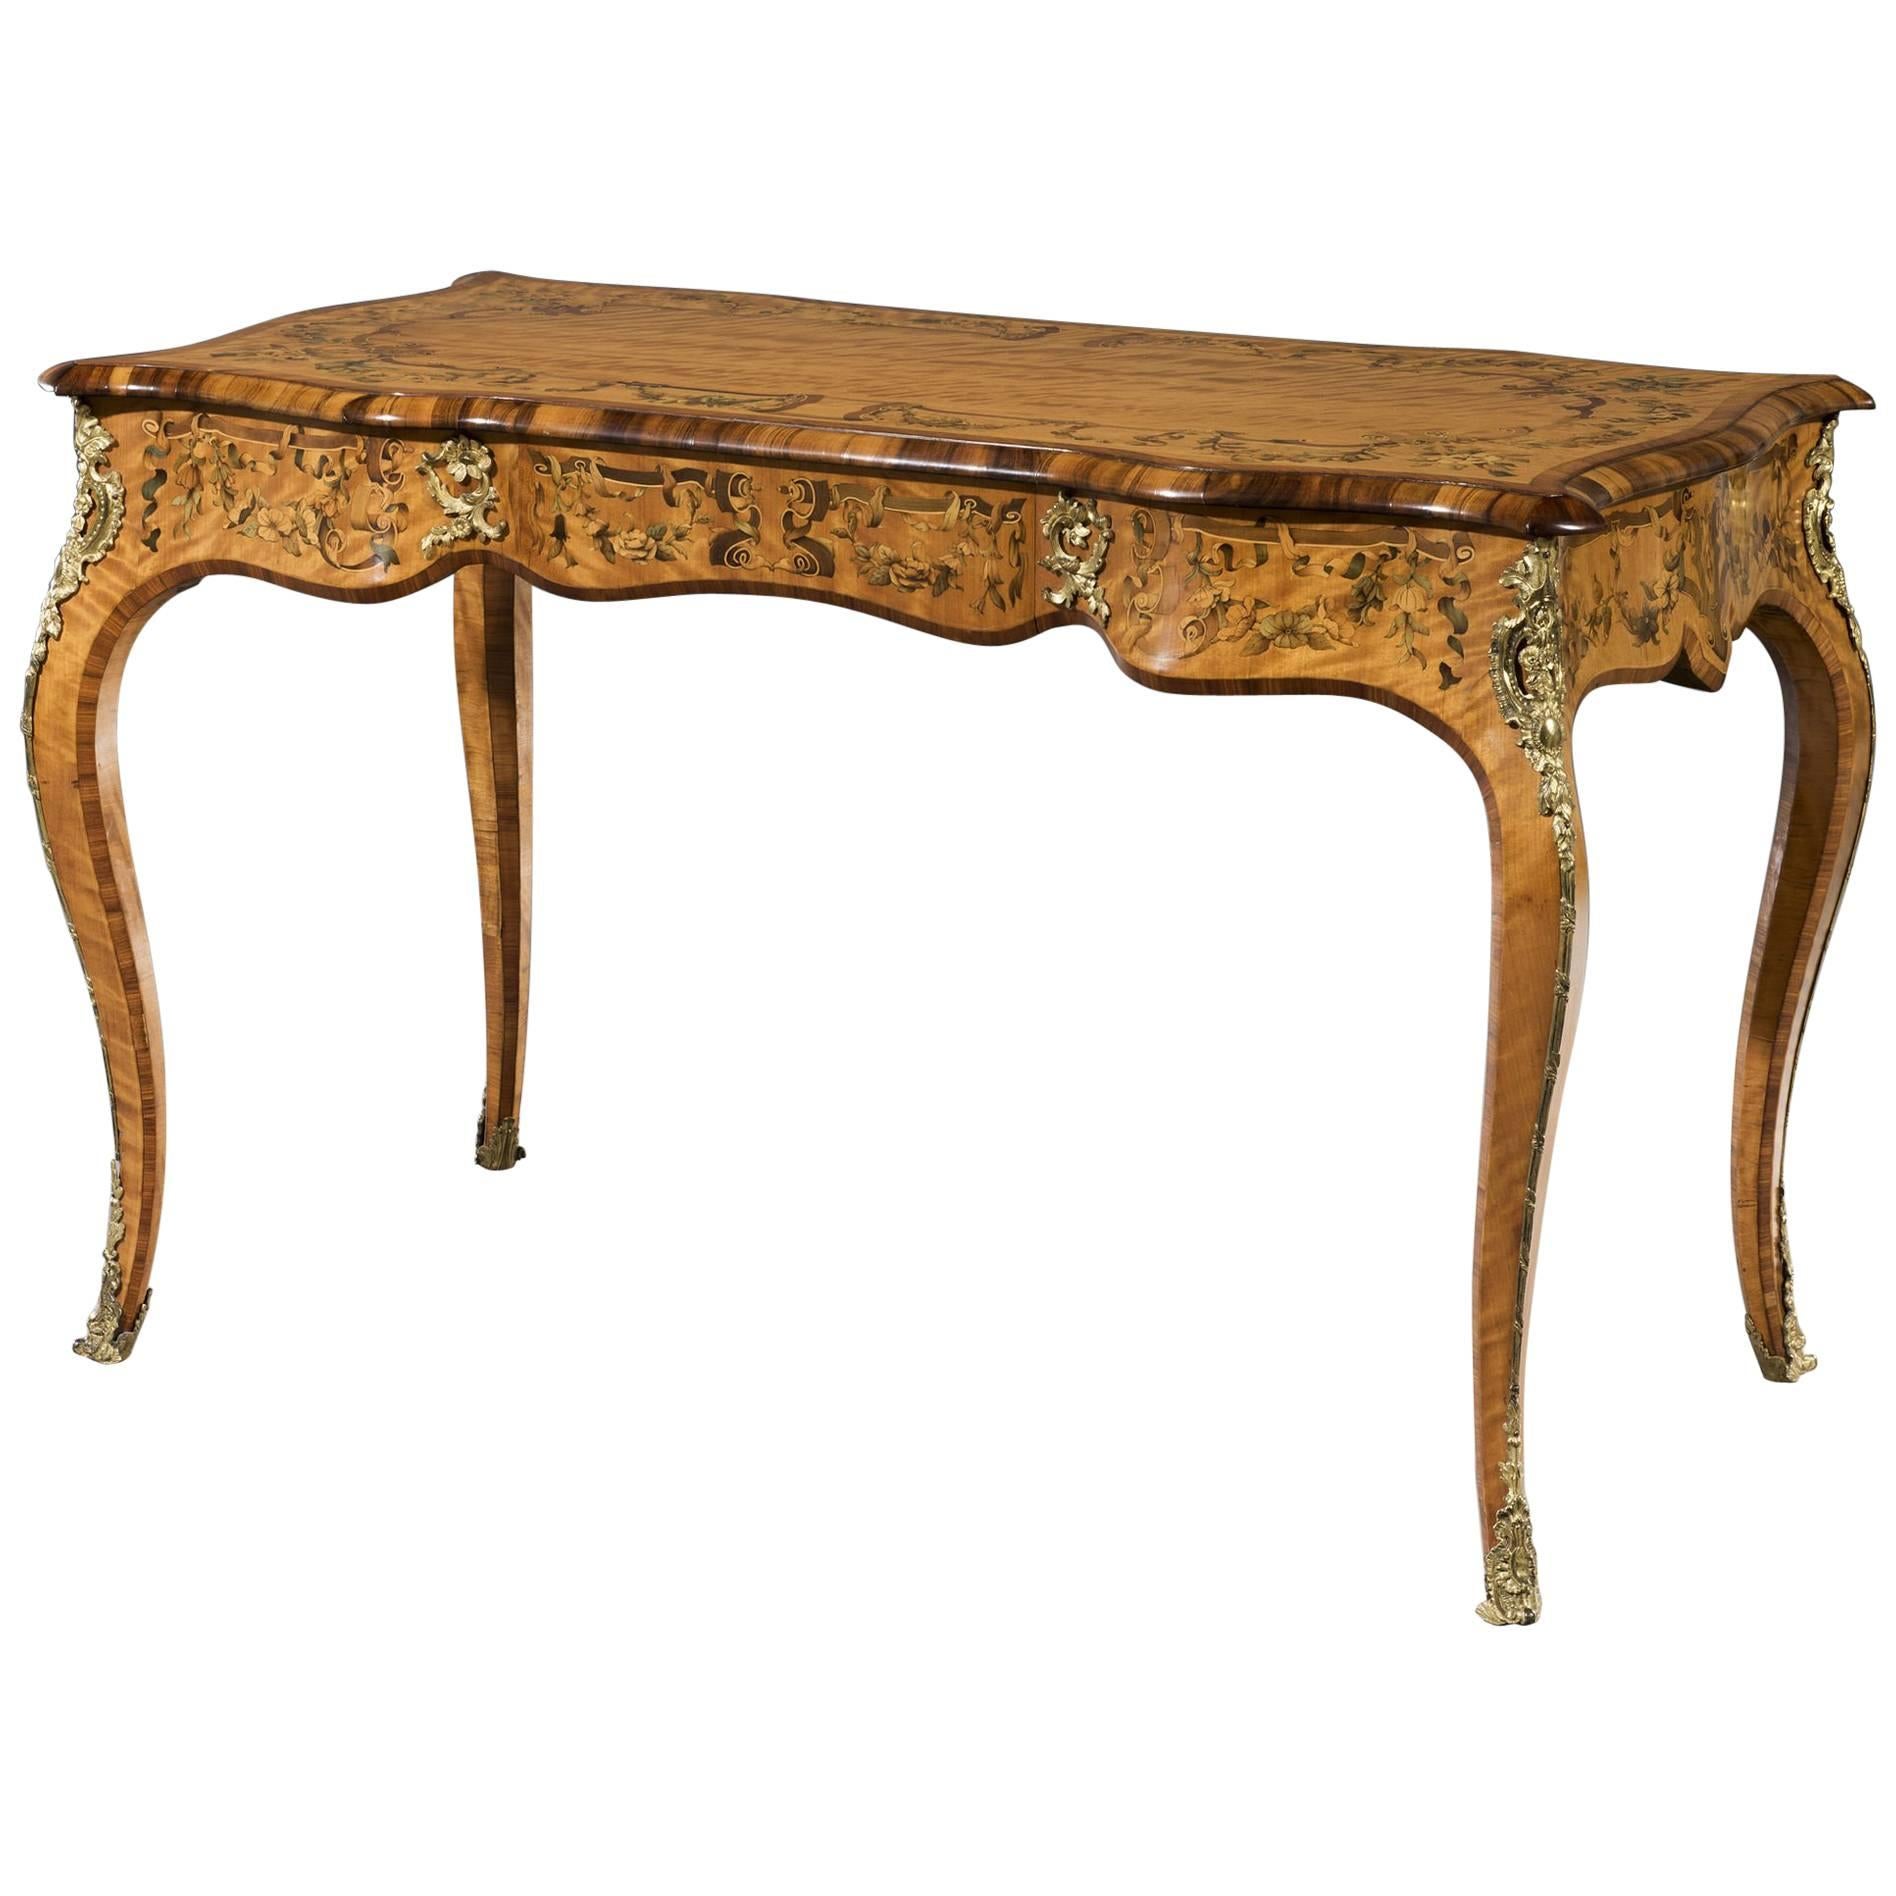 Satinwood and Marquetry Inlaid Gilt Ormolu Mounted Bureau Plat Table For Sale